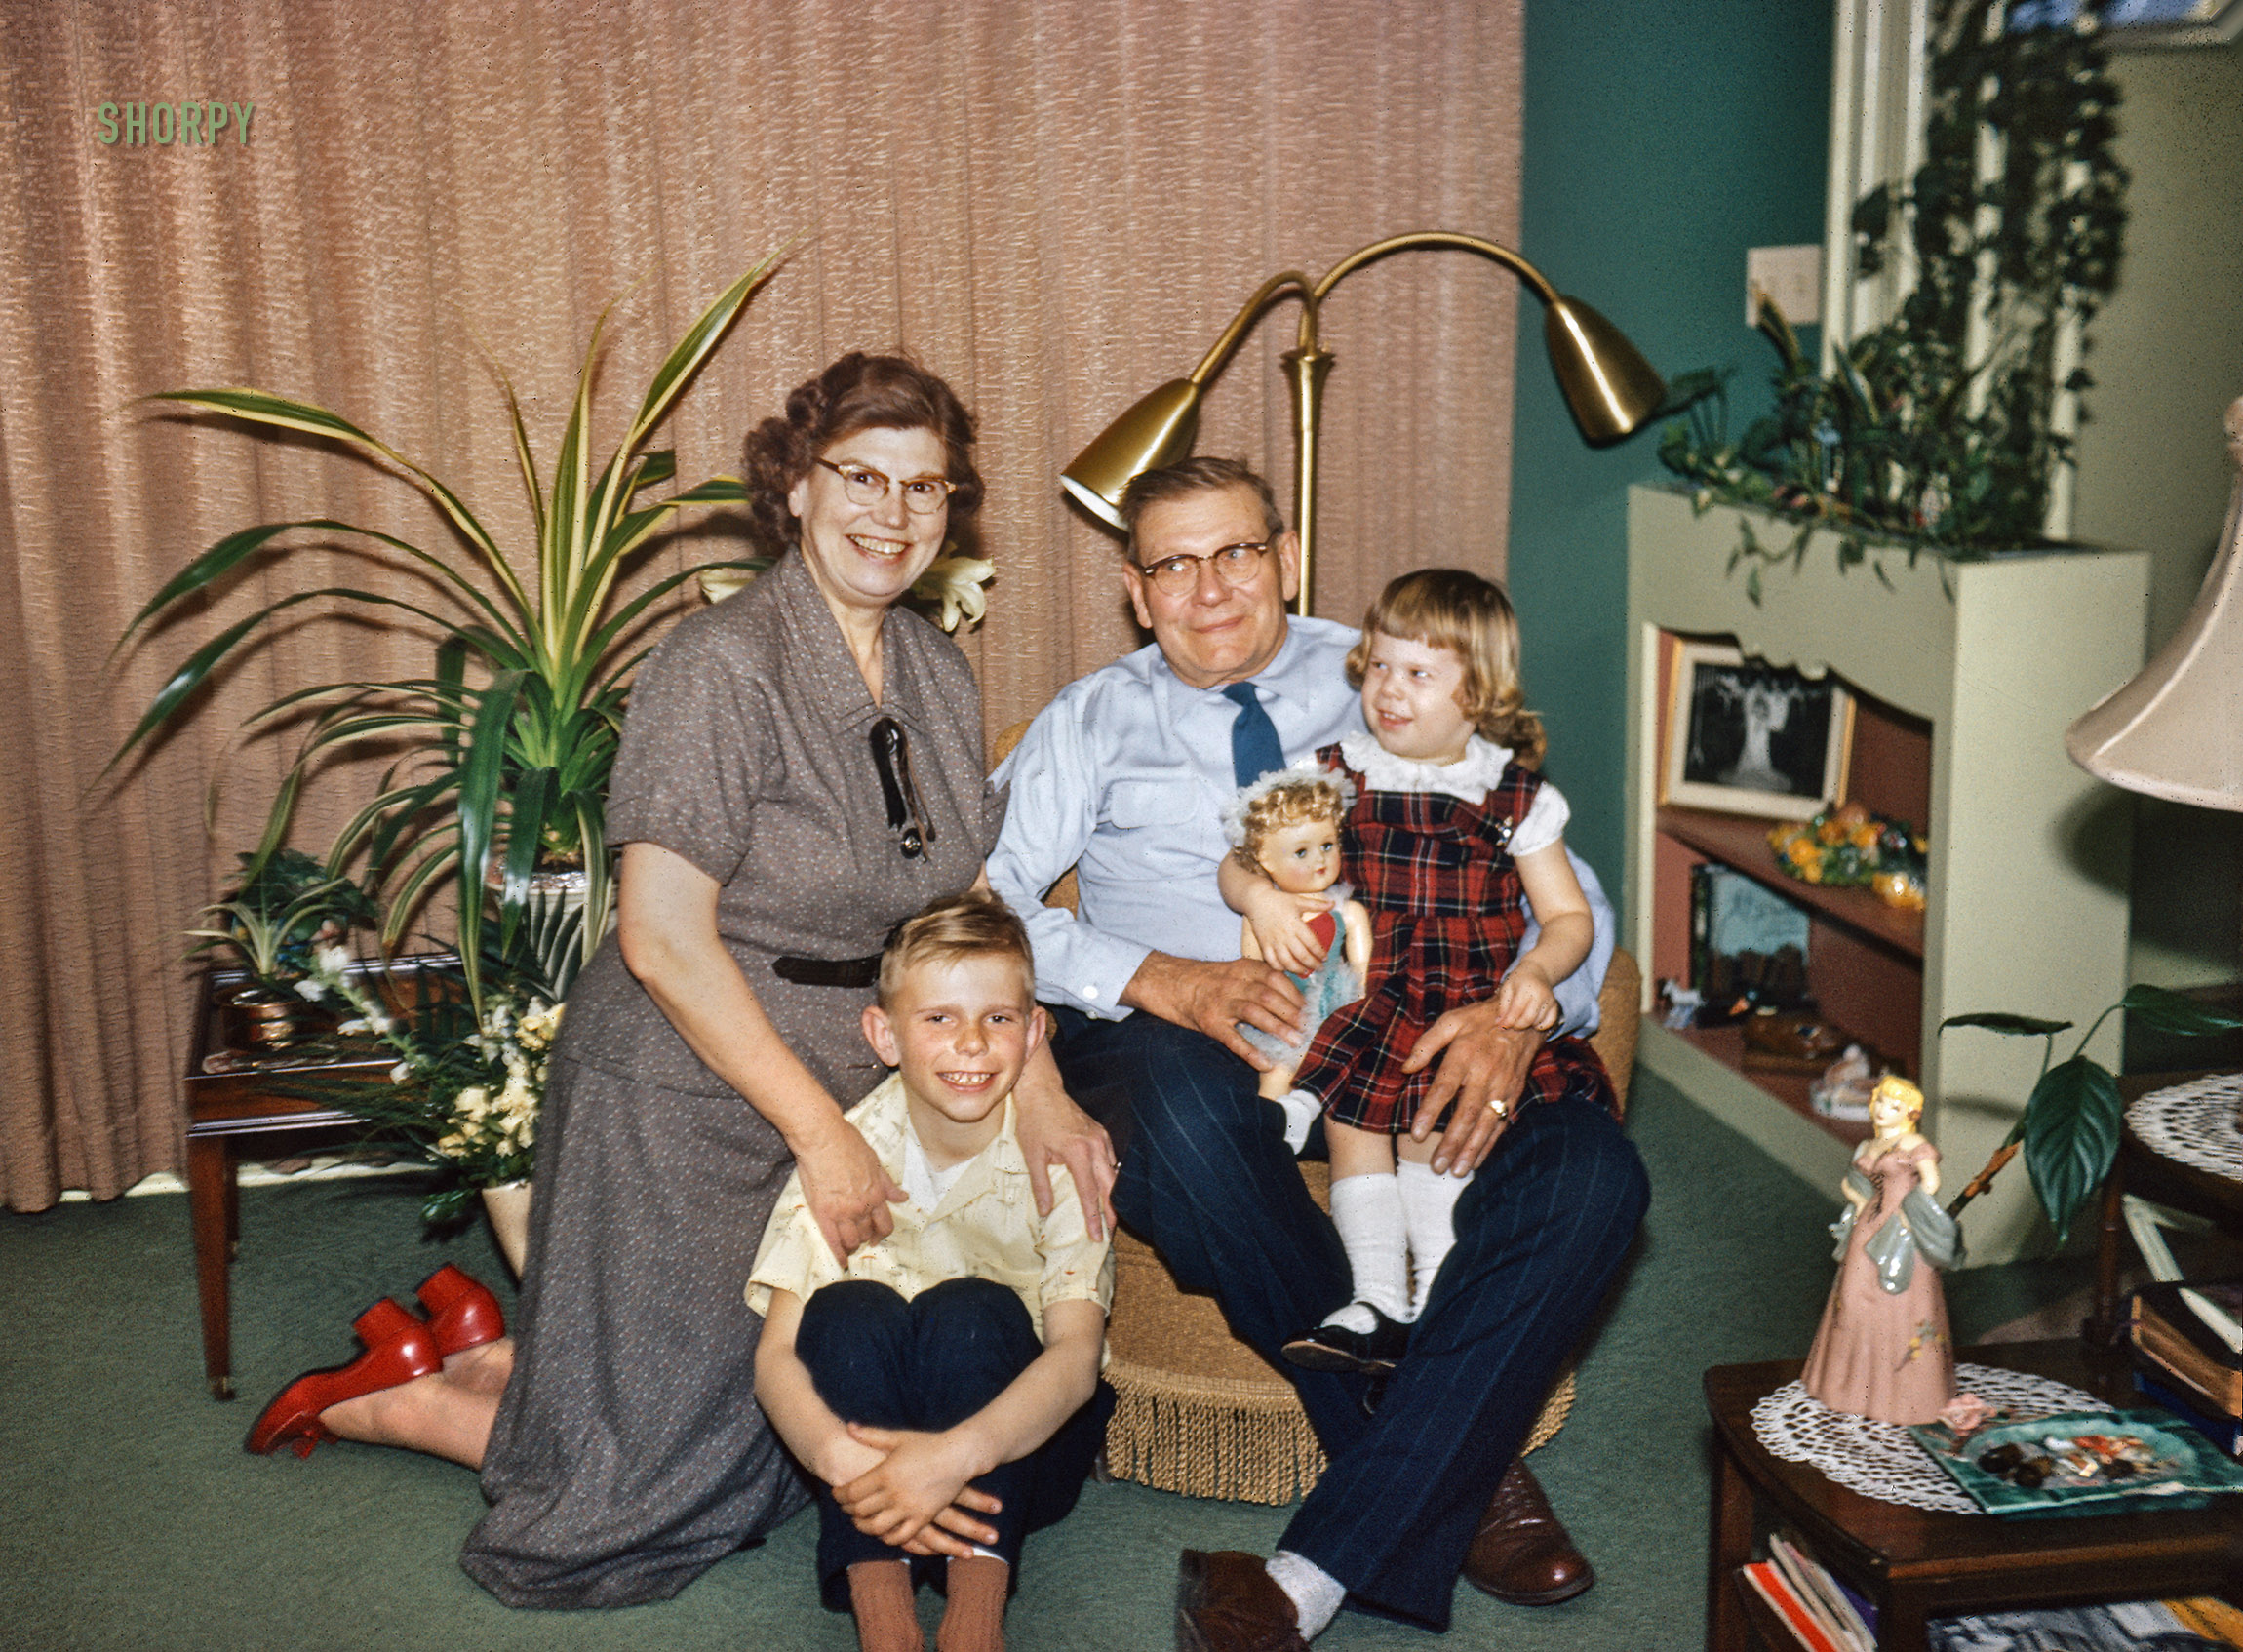 "Easter 1956." Mike and Barbara at their home in Menomonie with the grandparents, amid a polychrome plenitude of knickknacks and tchotchkes. View full size.